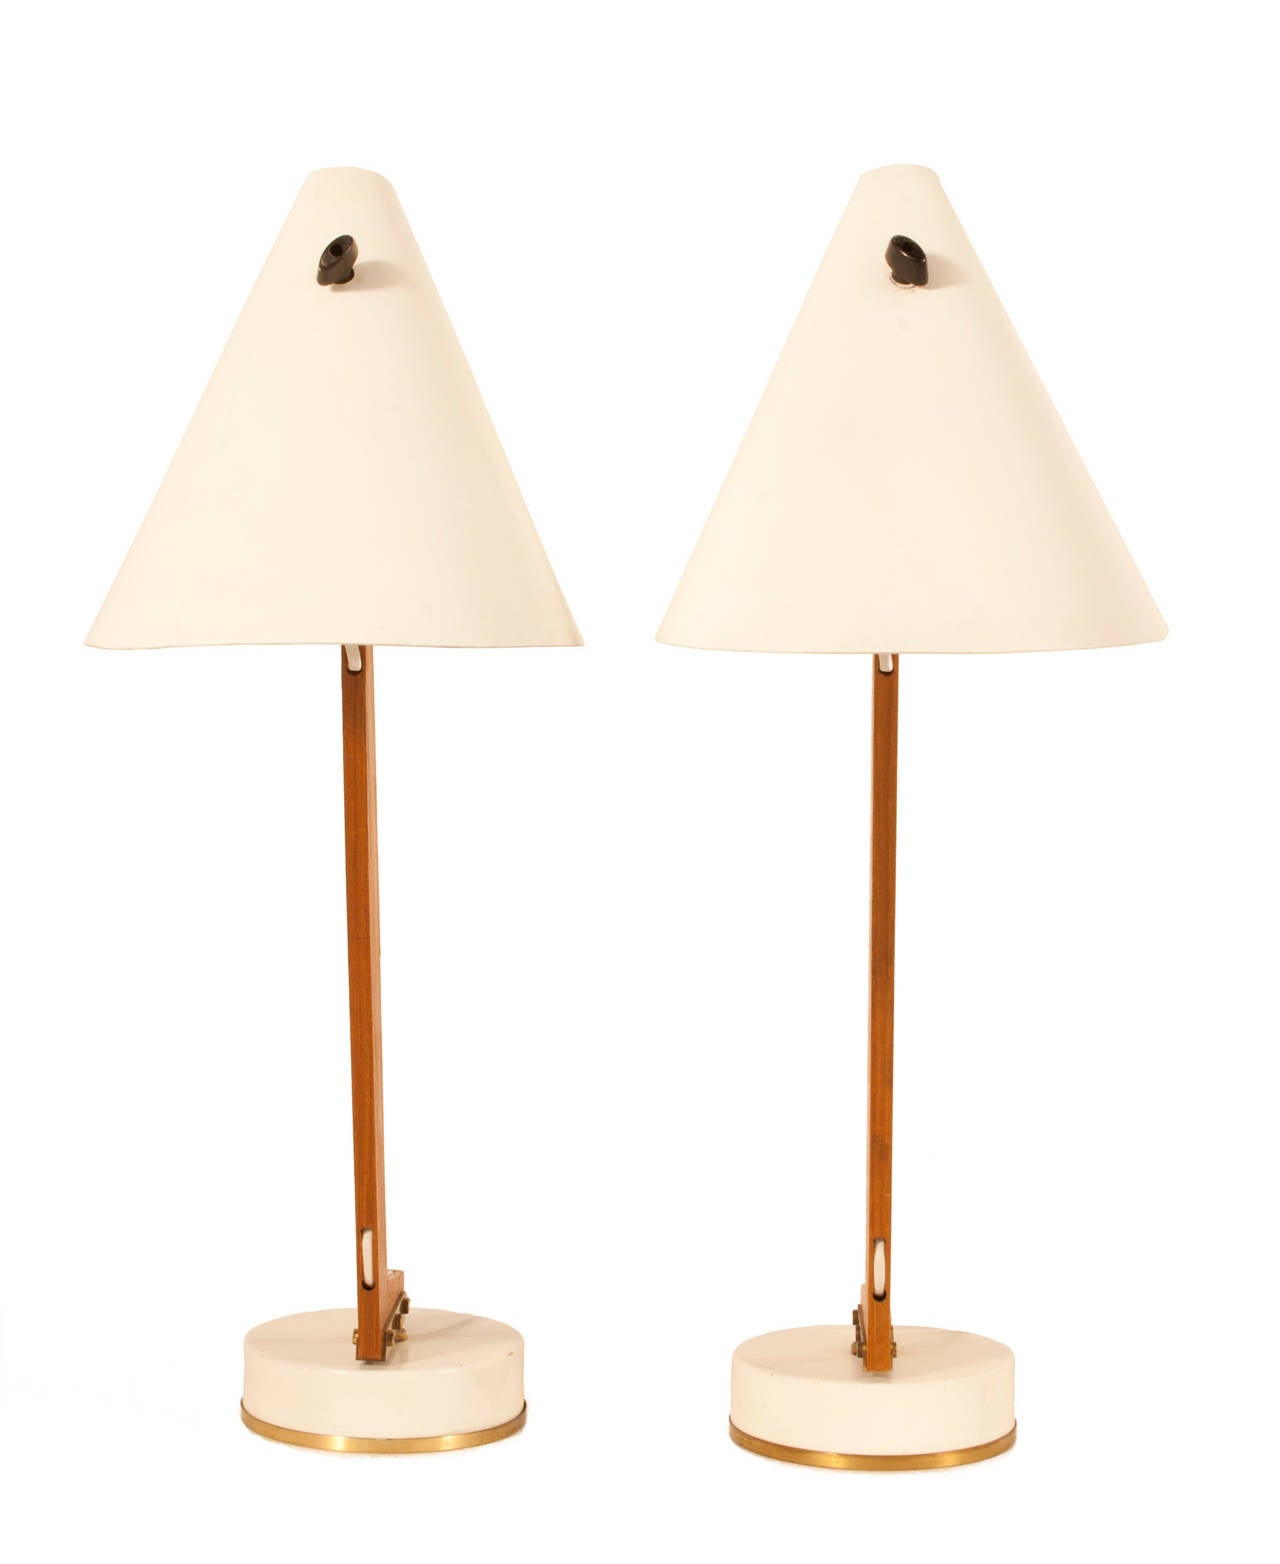 Pair of table lamps in brass, wood and metal that swivel from side to side by Hans-Agne Jakobsson.